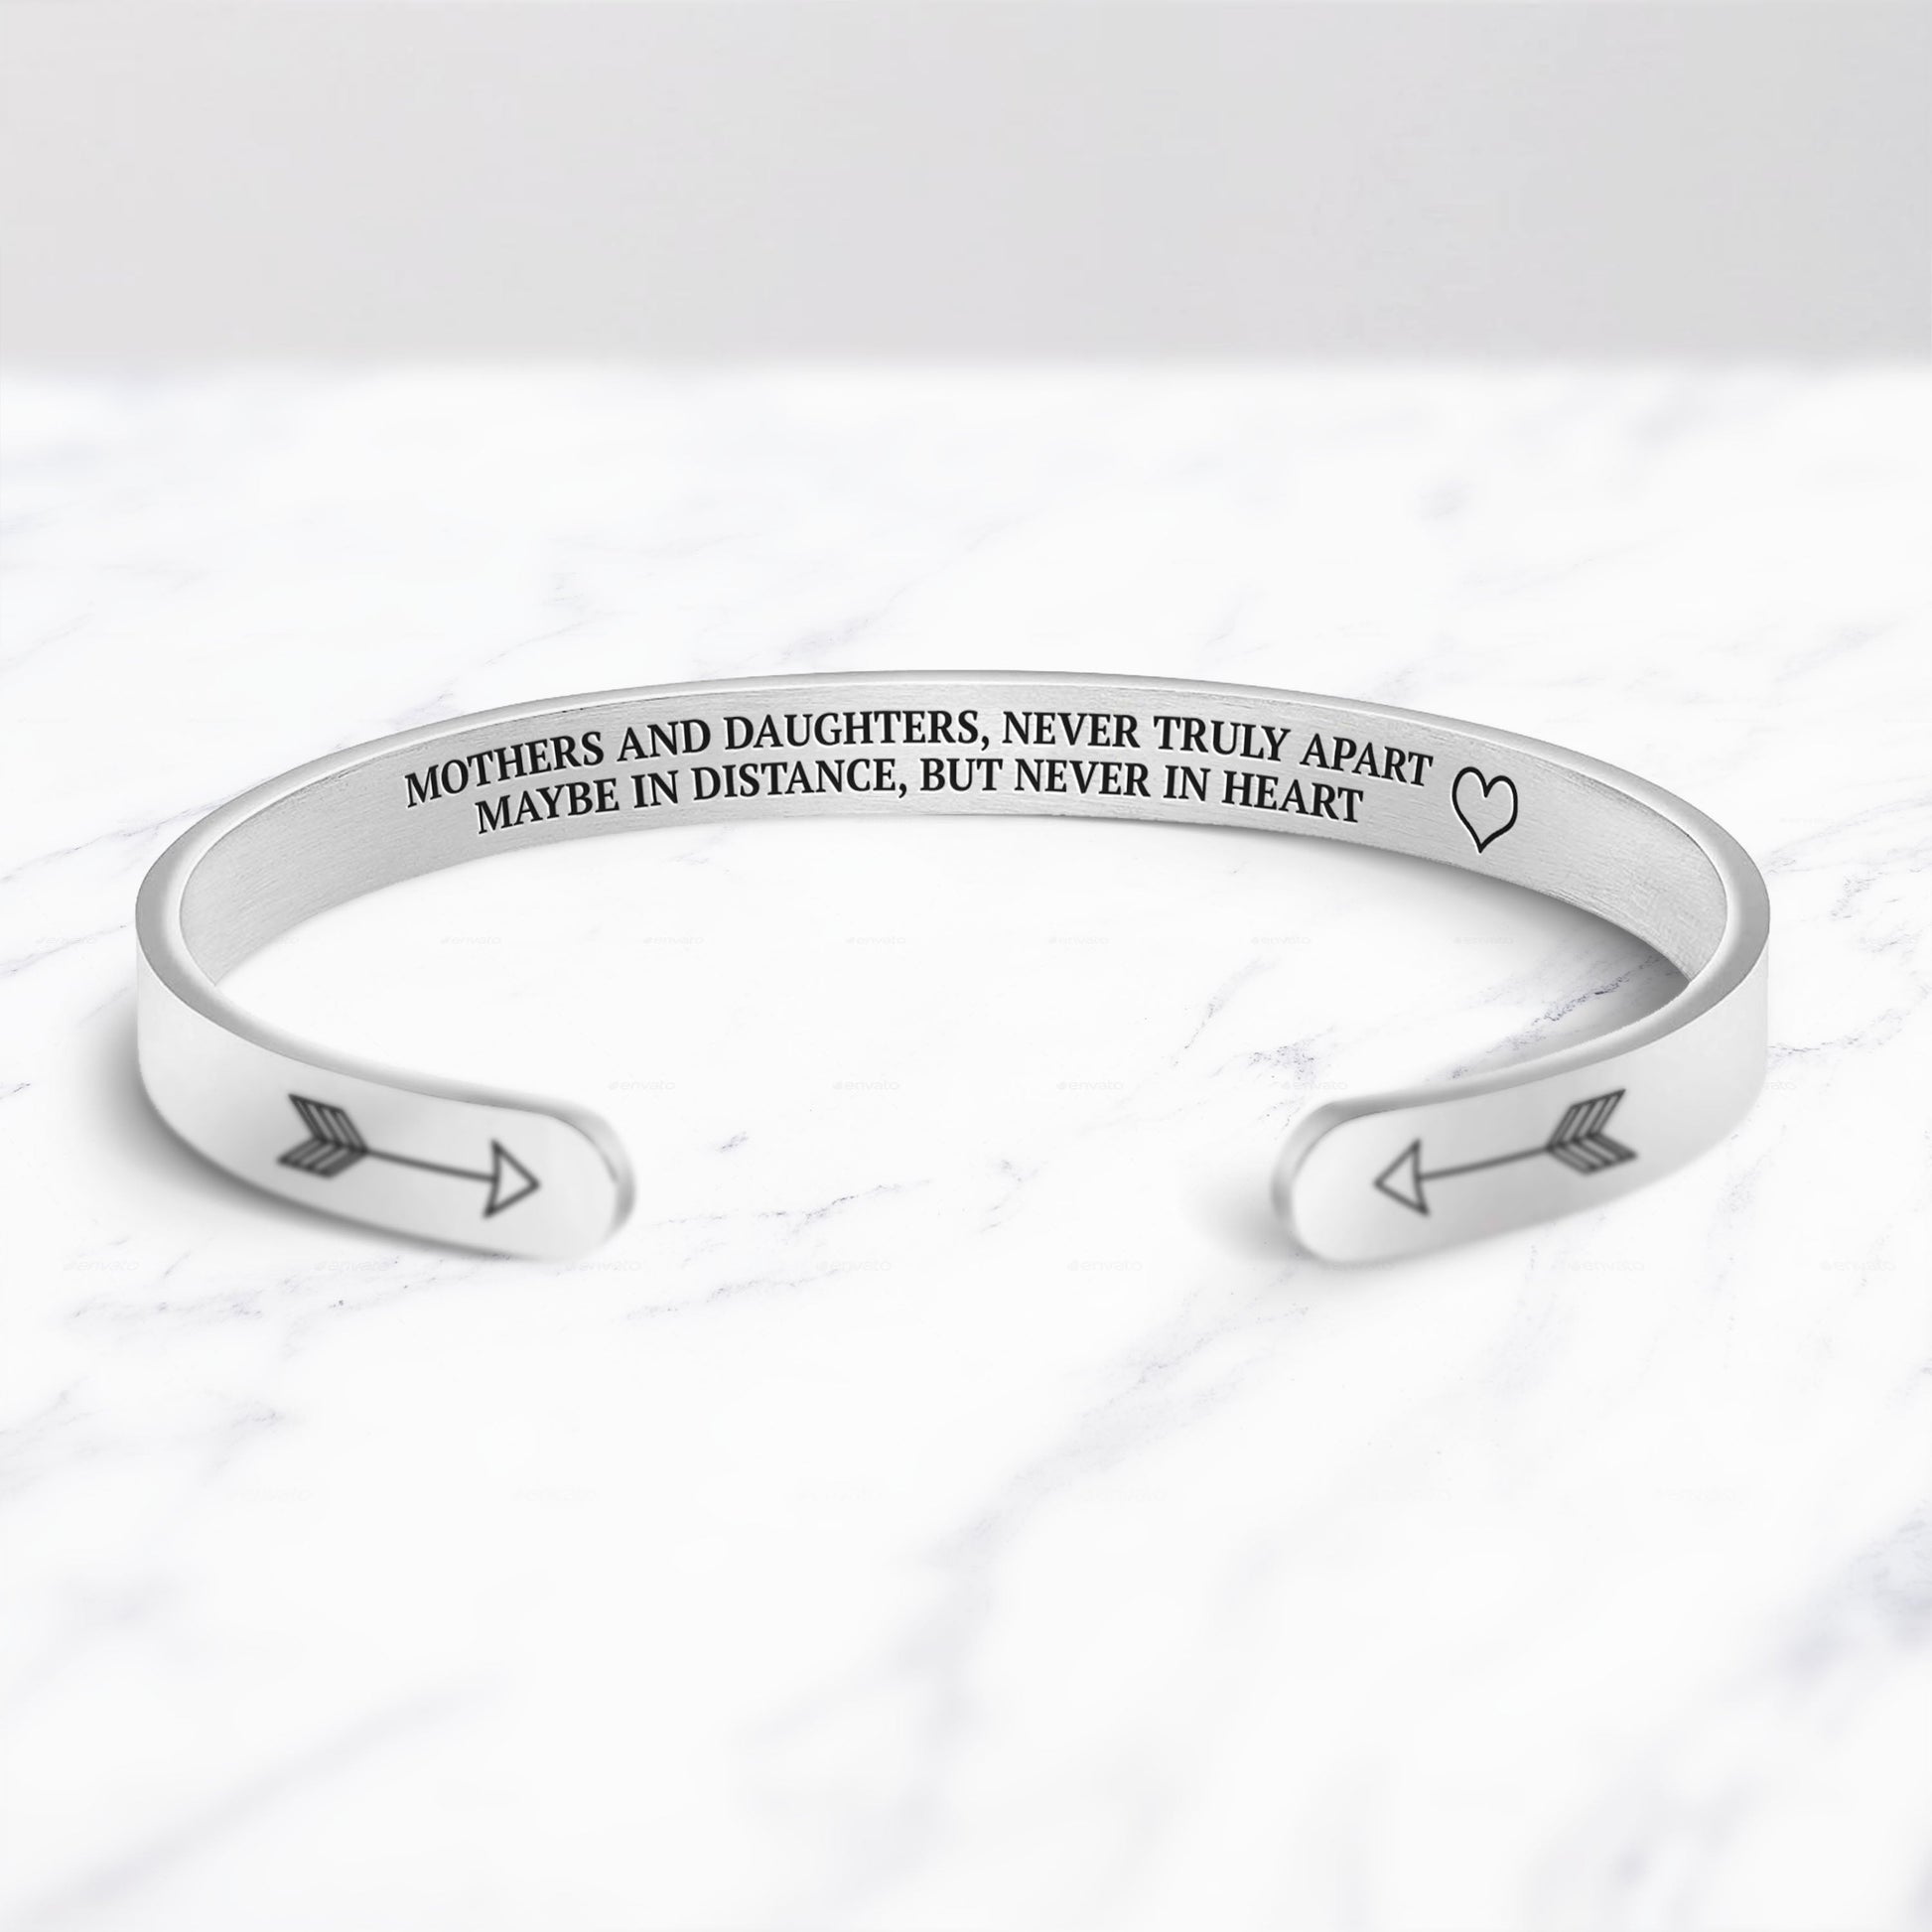 Mothers and Daughters Never Truly Part Cuff Bracelet bracelet with silver plating on a marble background